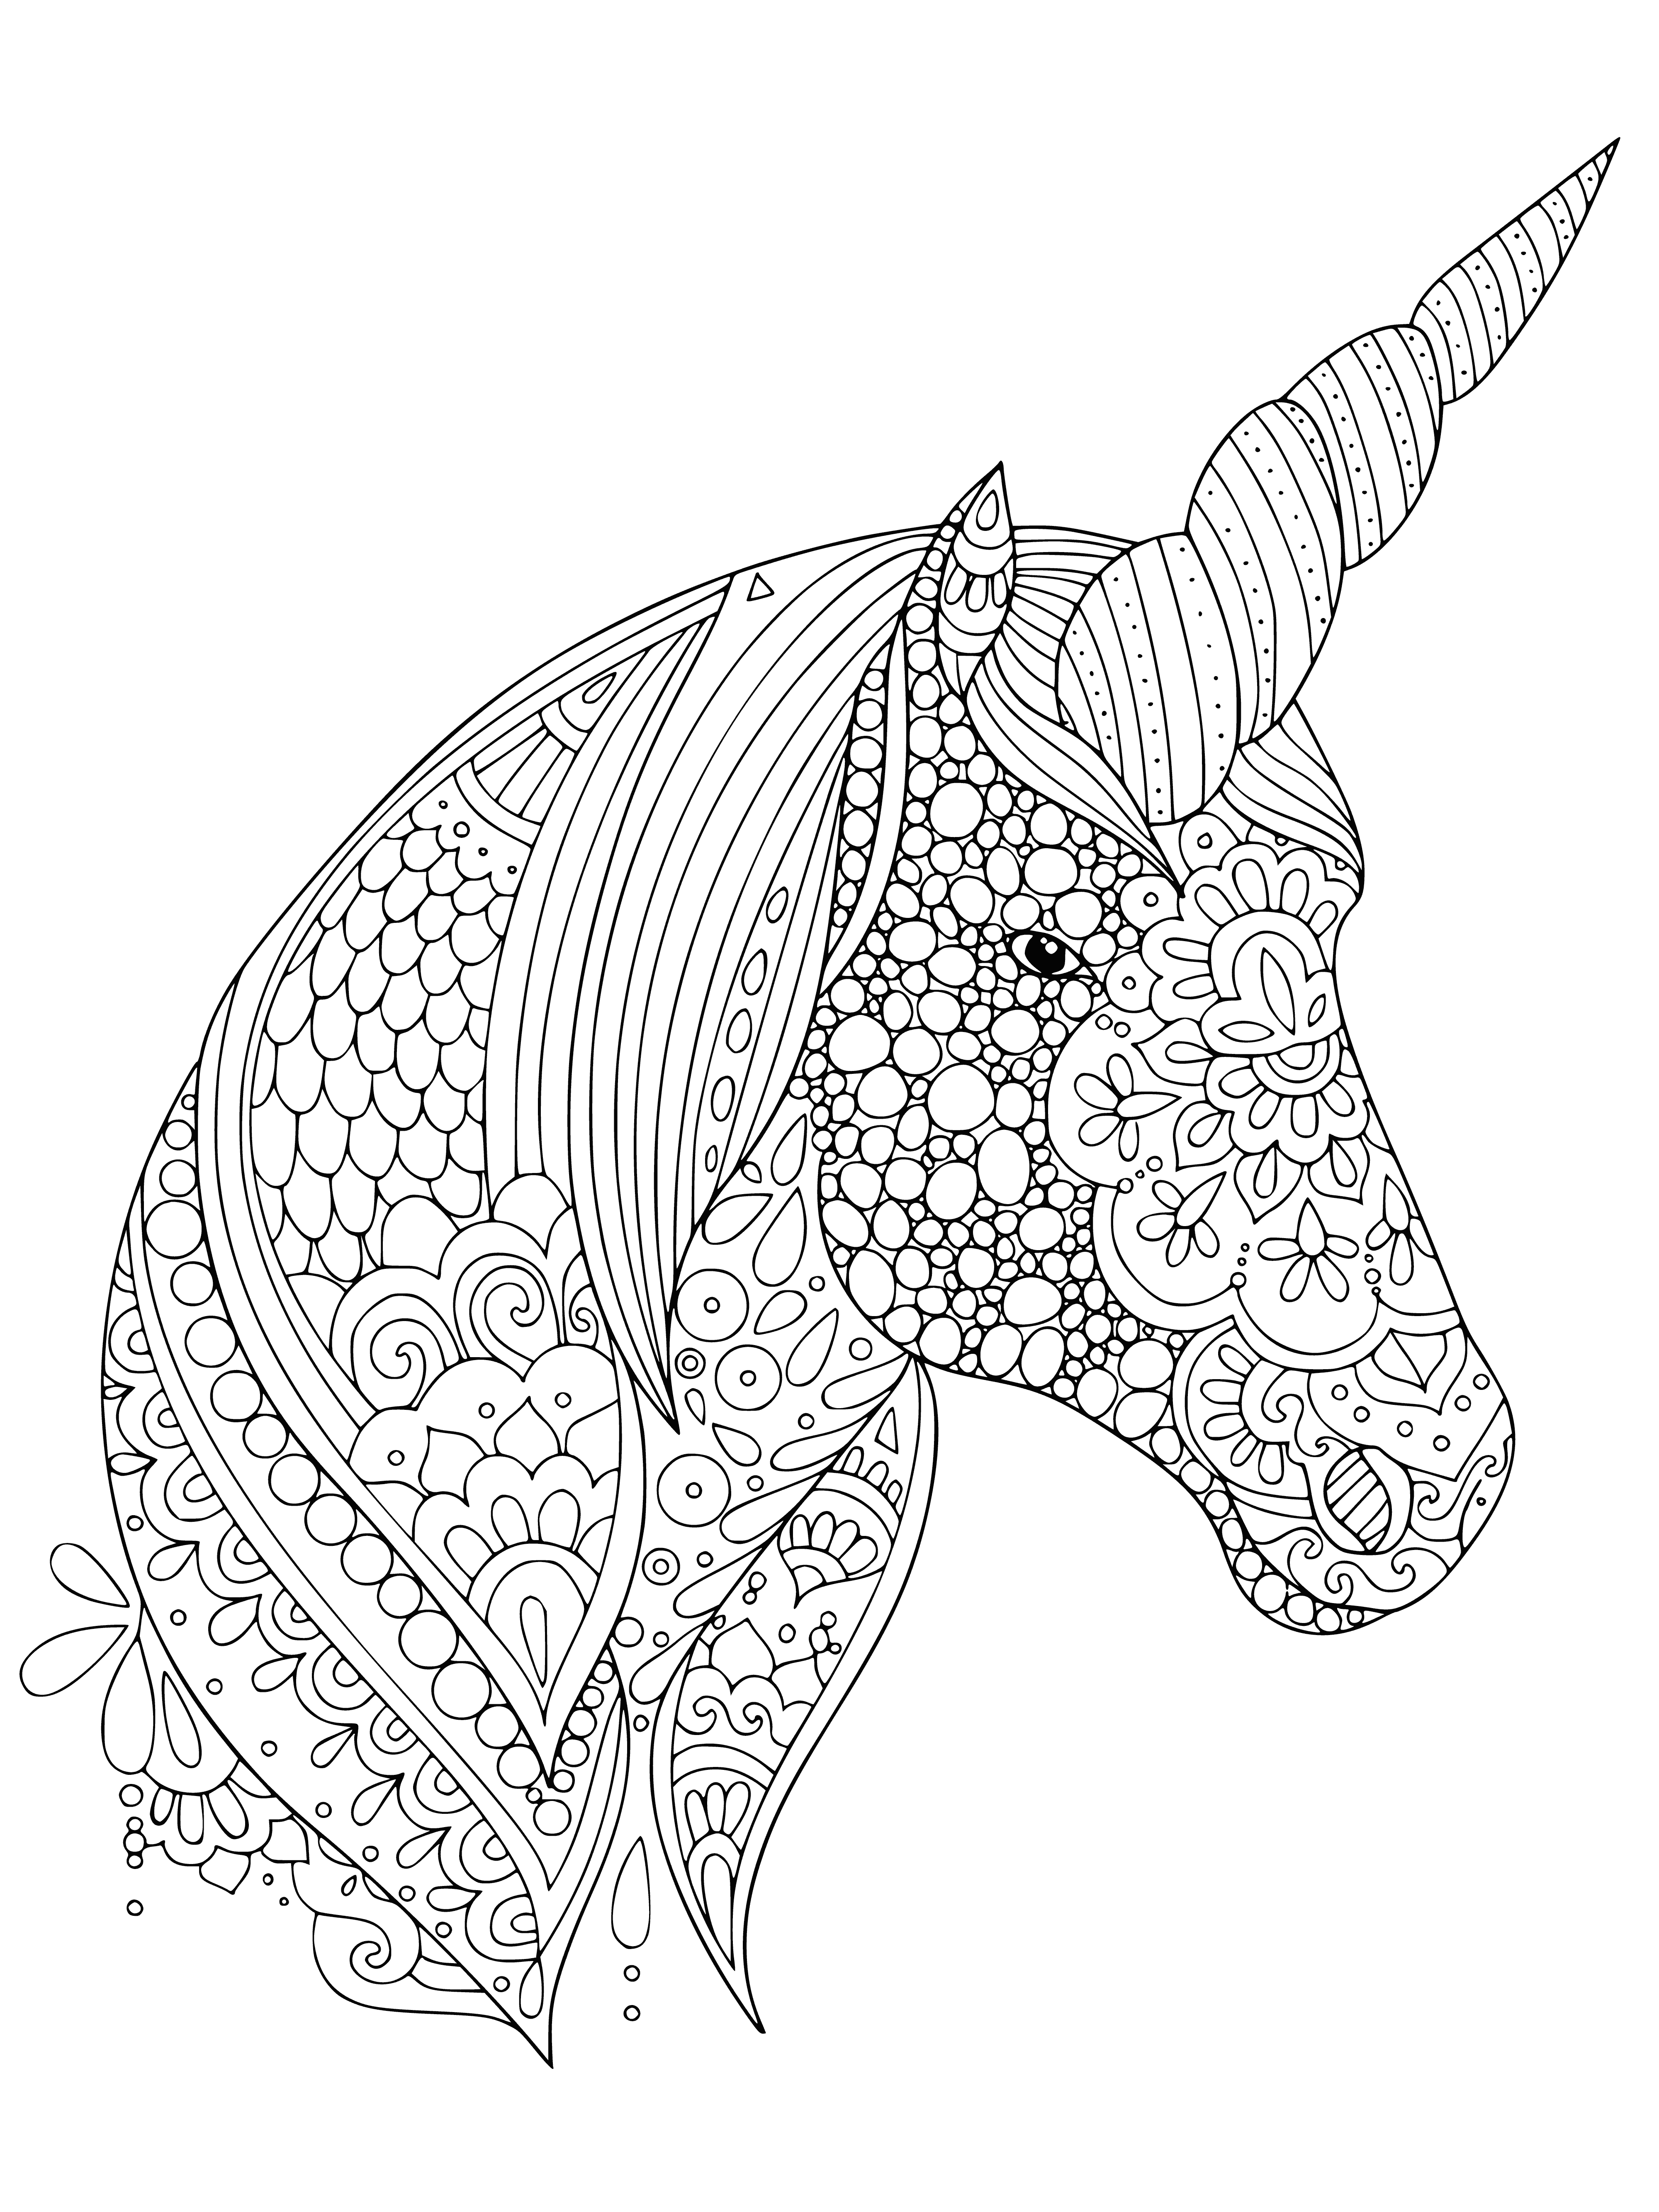 coloring page: : magical scene of colorful joy!

Unicorns, flowers, butterflies: a magical scene of color and joy!